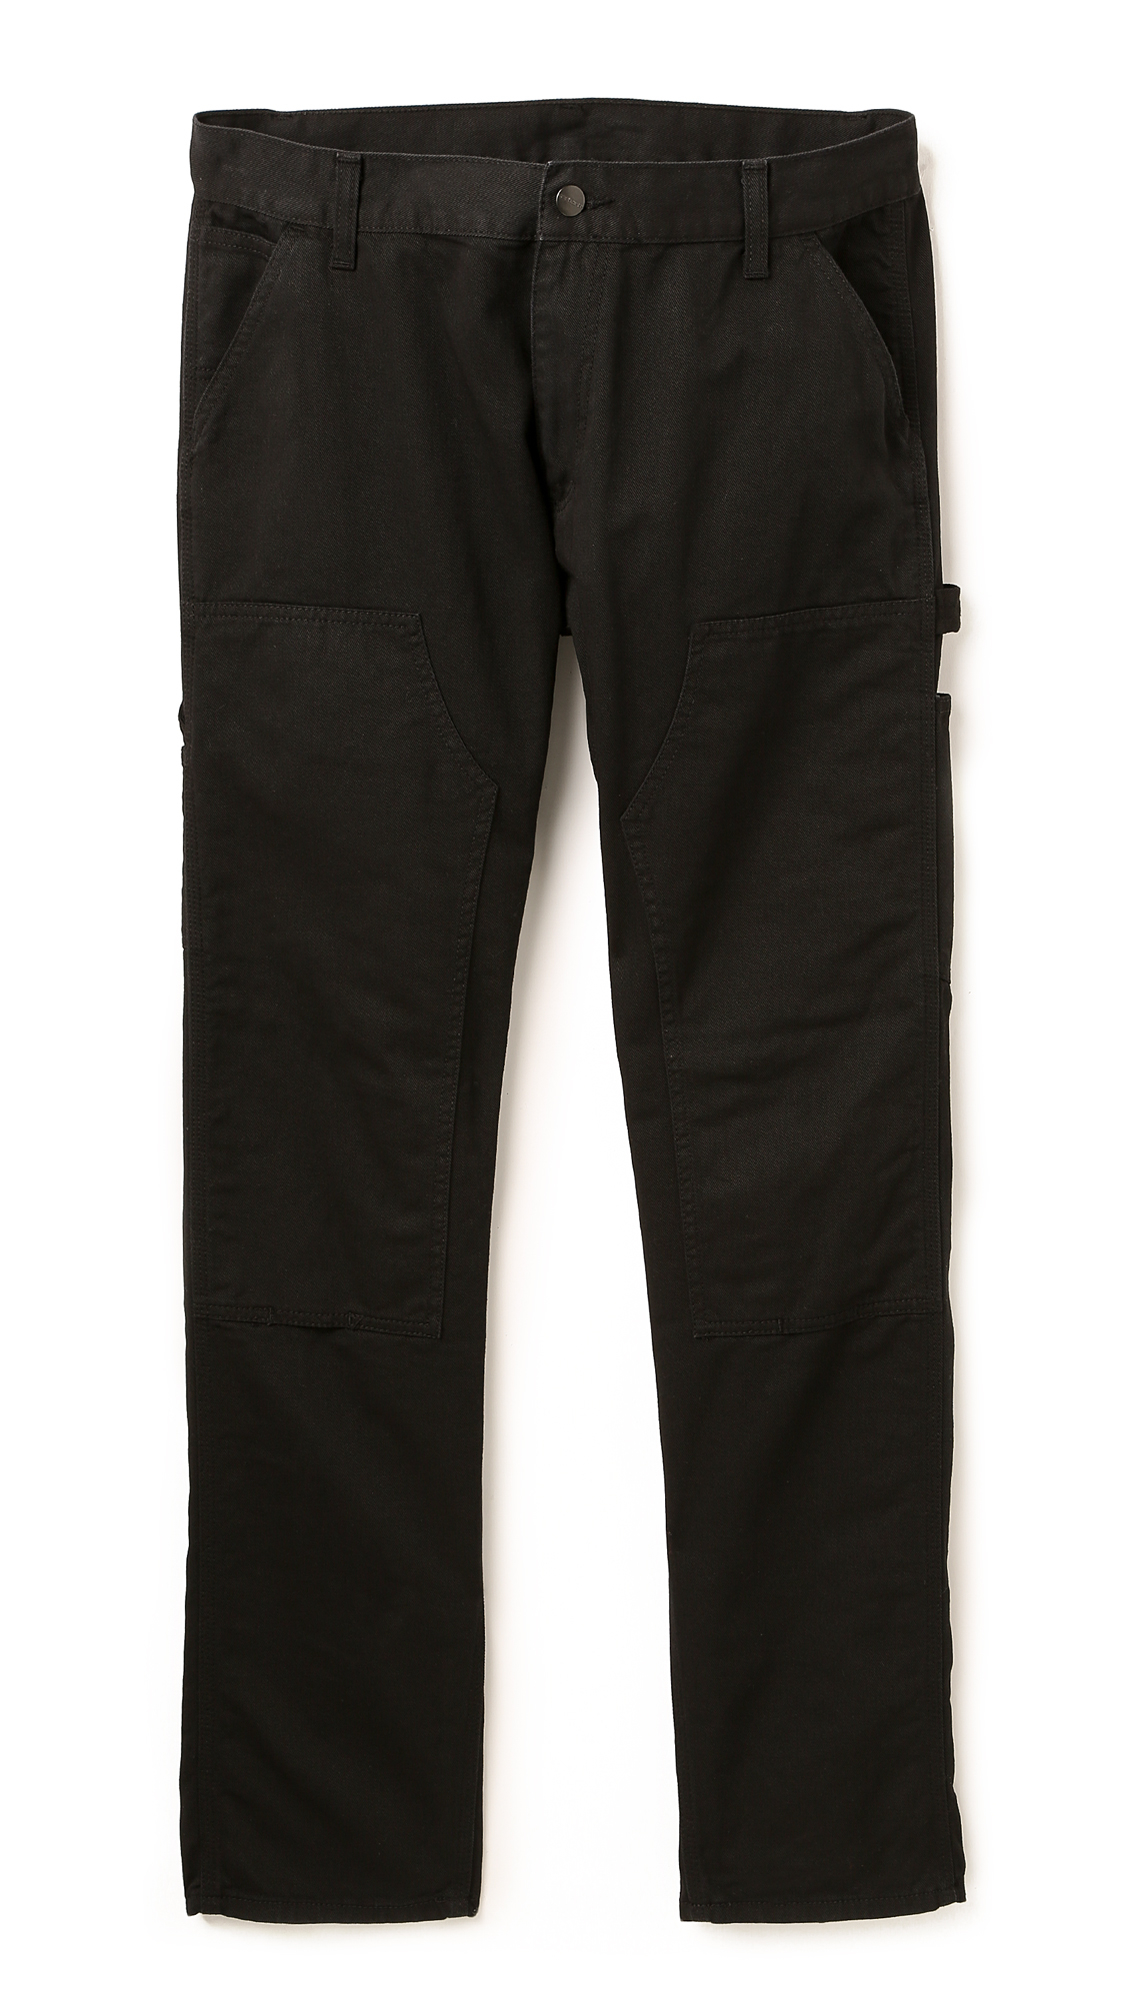 Lyst - Carhartt Wip Lincoln Double Knee Pants in Black for Men